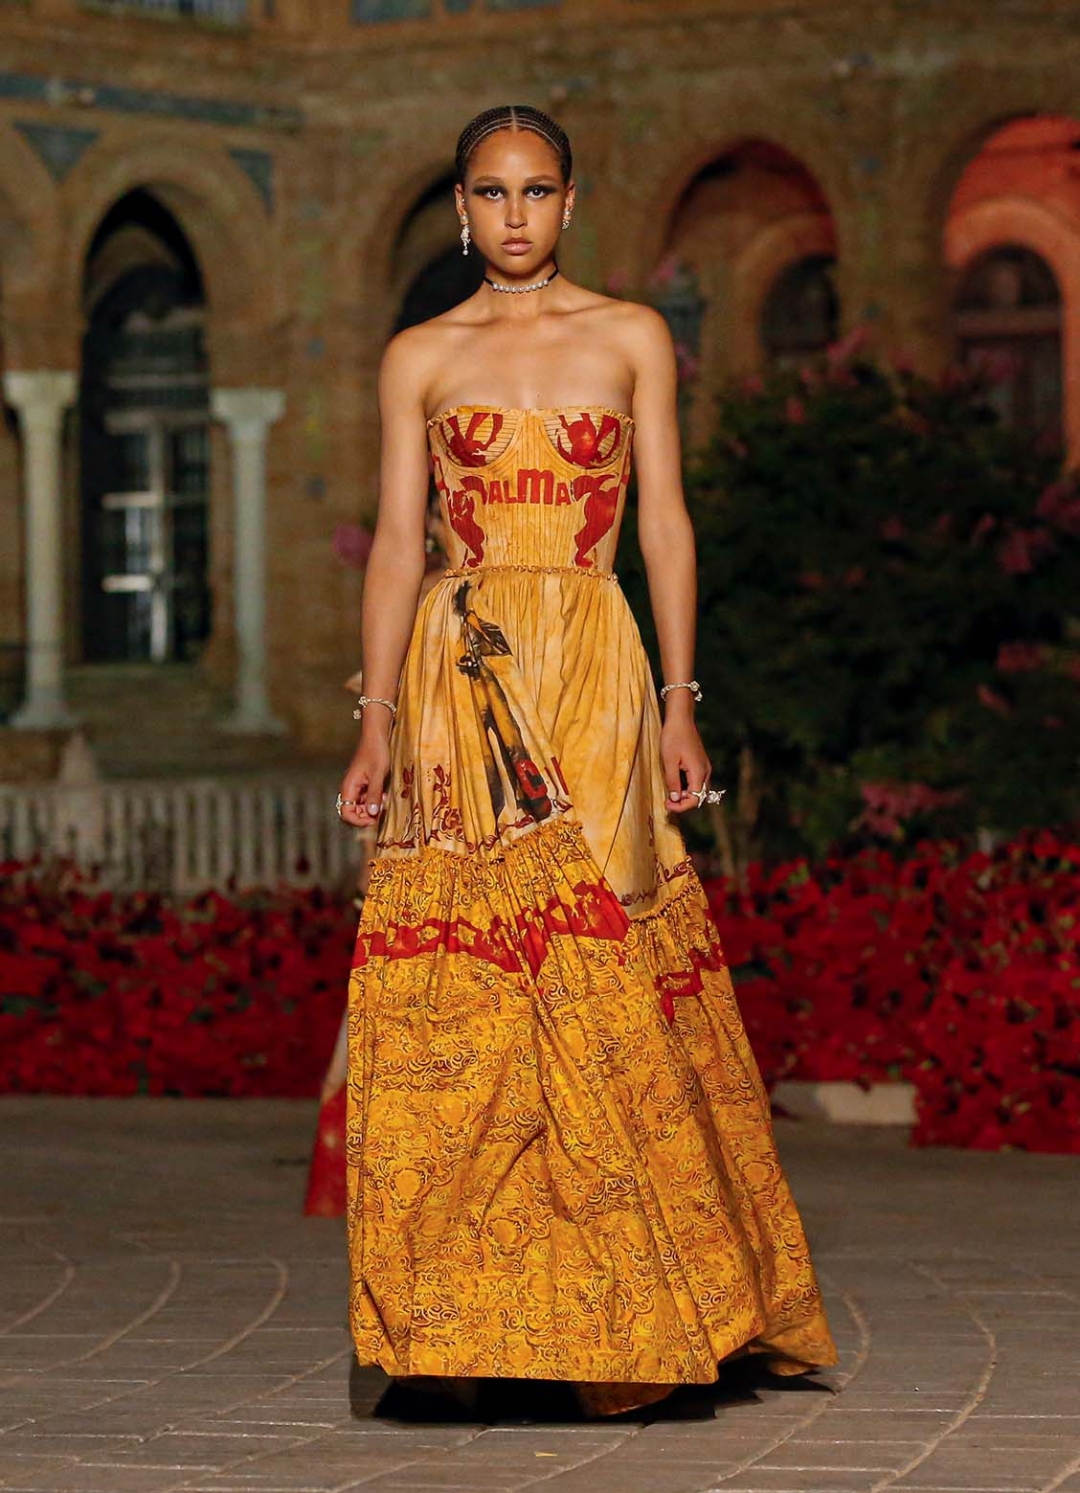 Dress with prints by María Ángeles Vila for the Dior ‘Cruise 2023’ fashion show in Seville